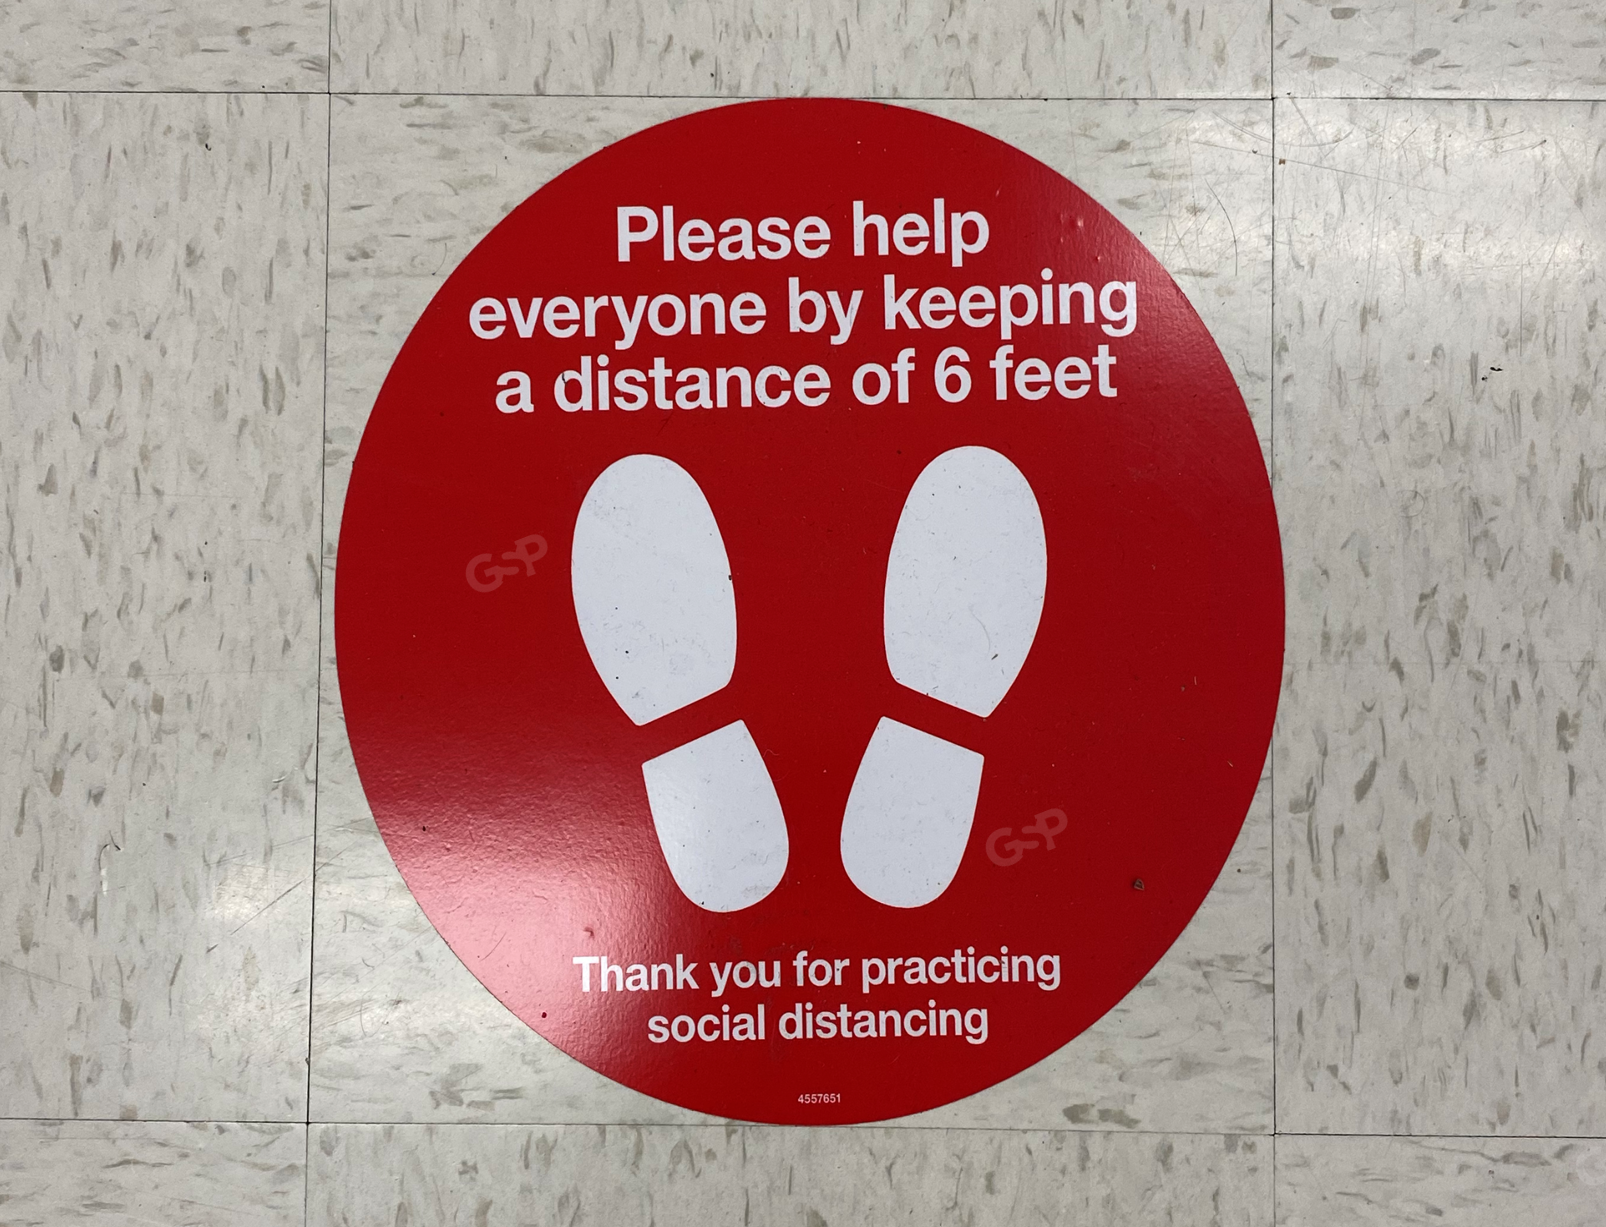 Durable, Antimicrobial Social Distancing Floor Decals